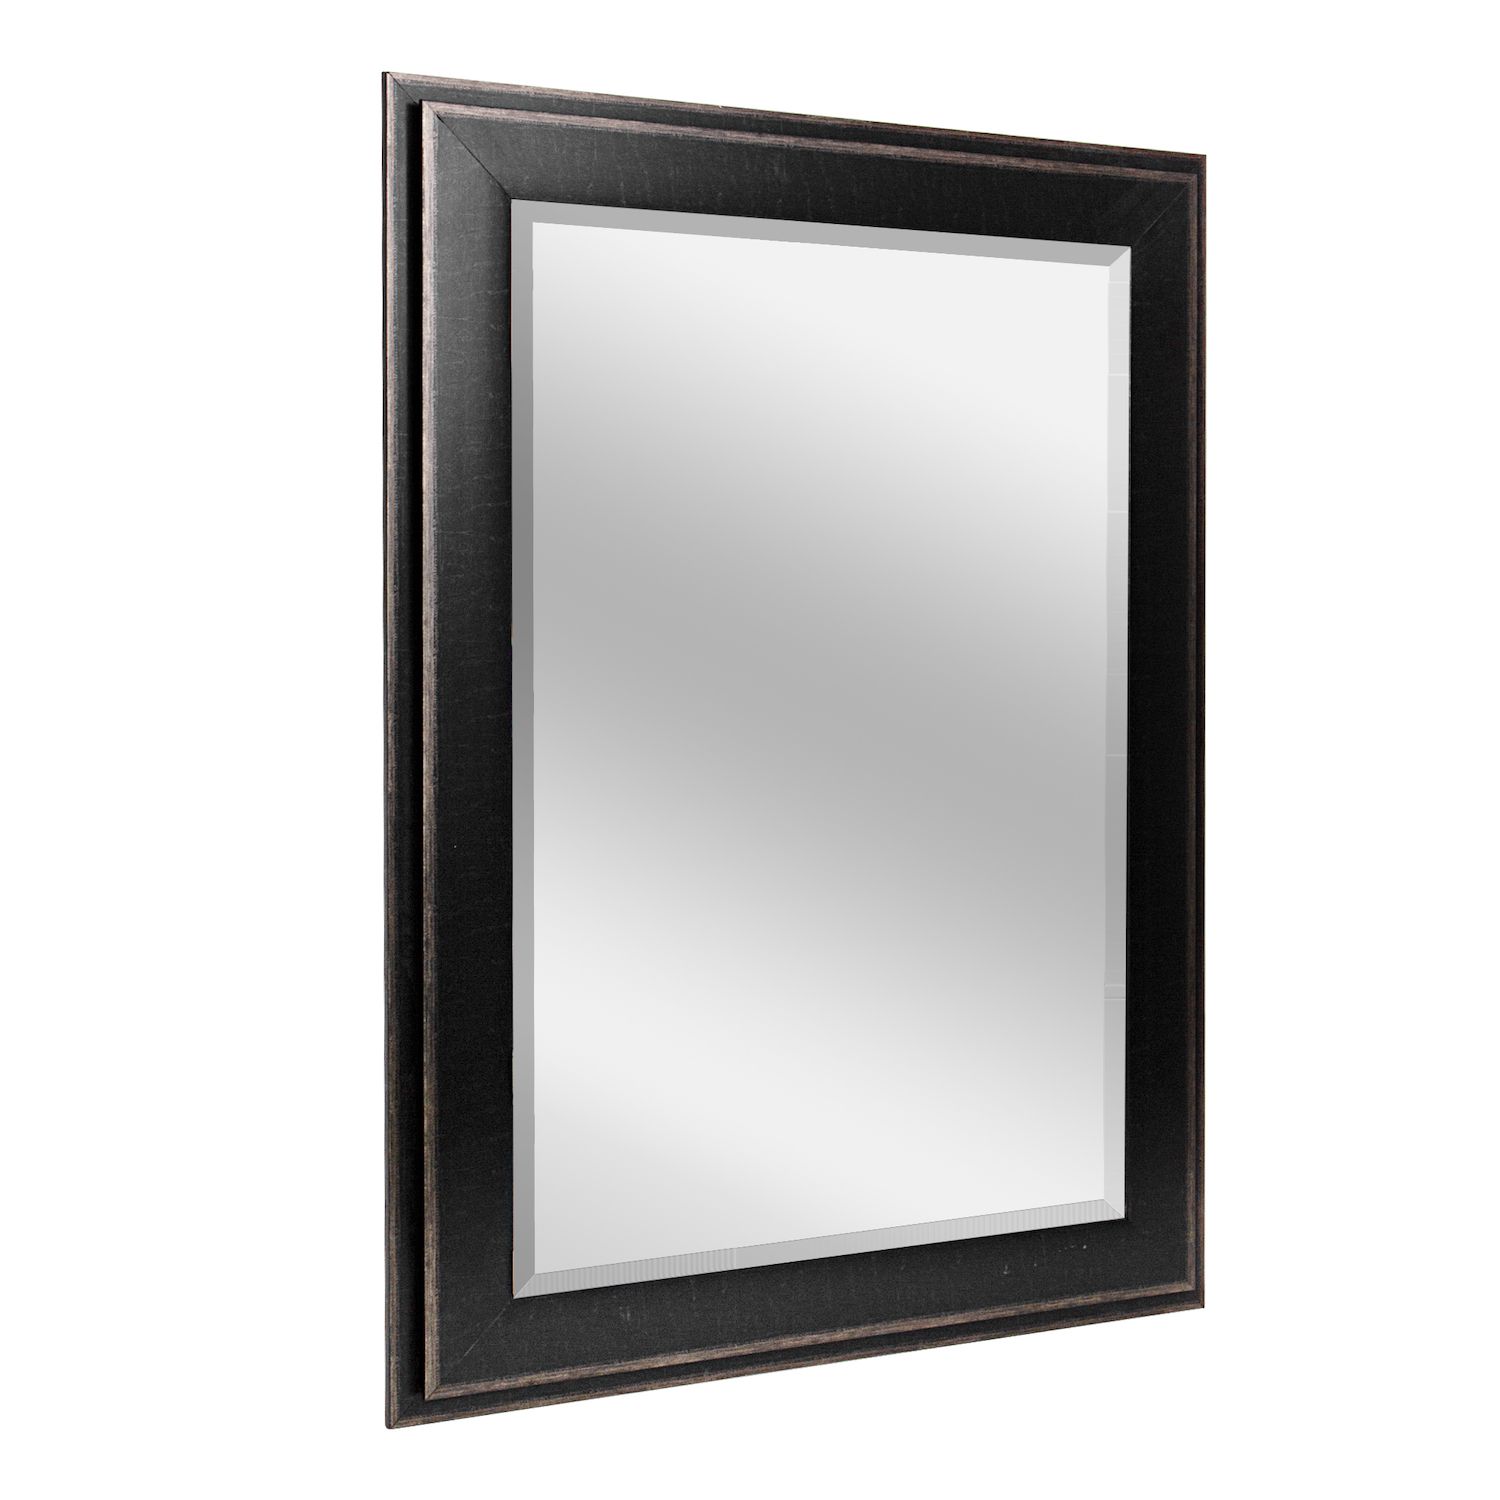 Image for Head West Black Two-Step Frame Bevel Wall Mirror 29" x 35" at Kohl's.